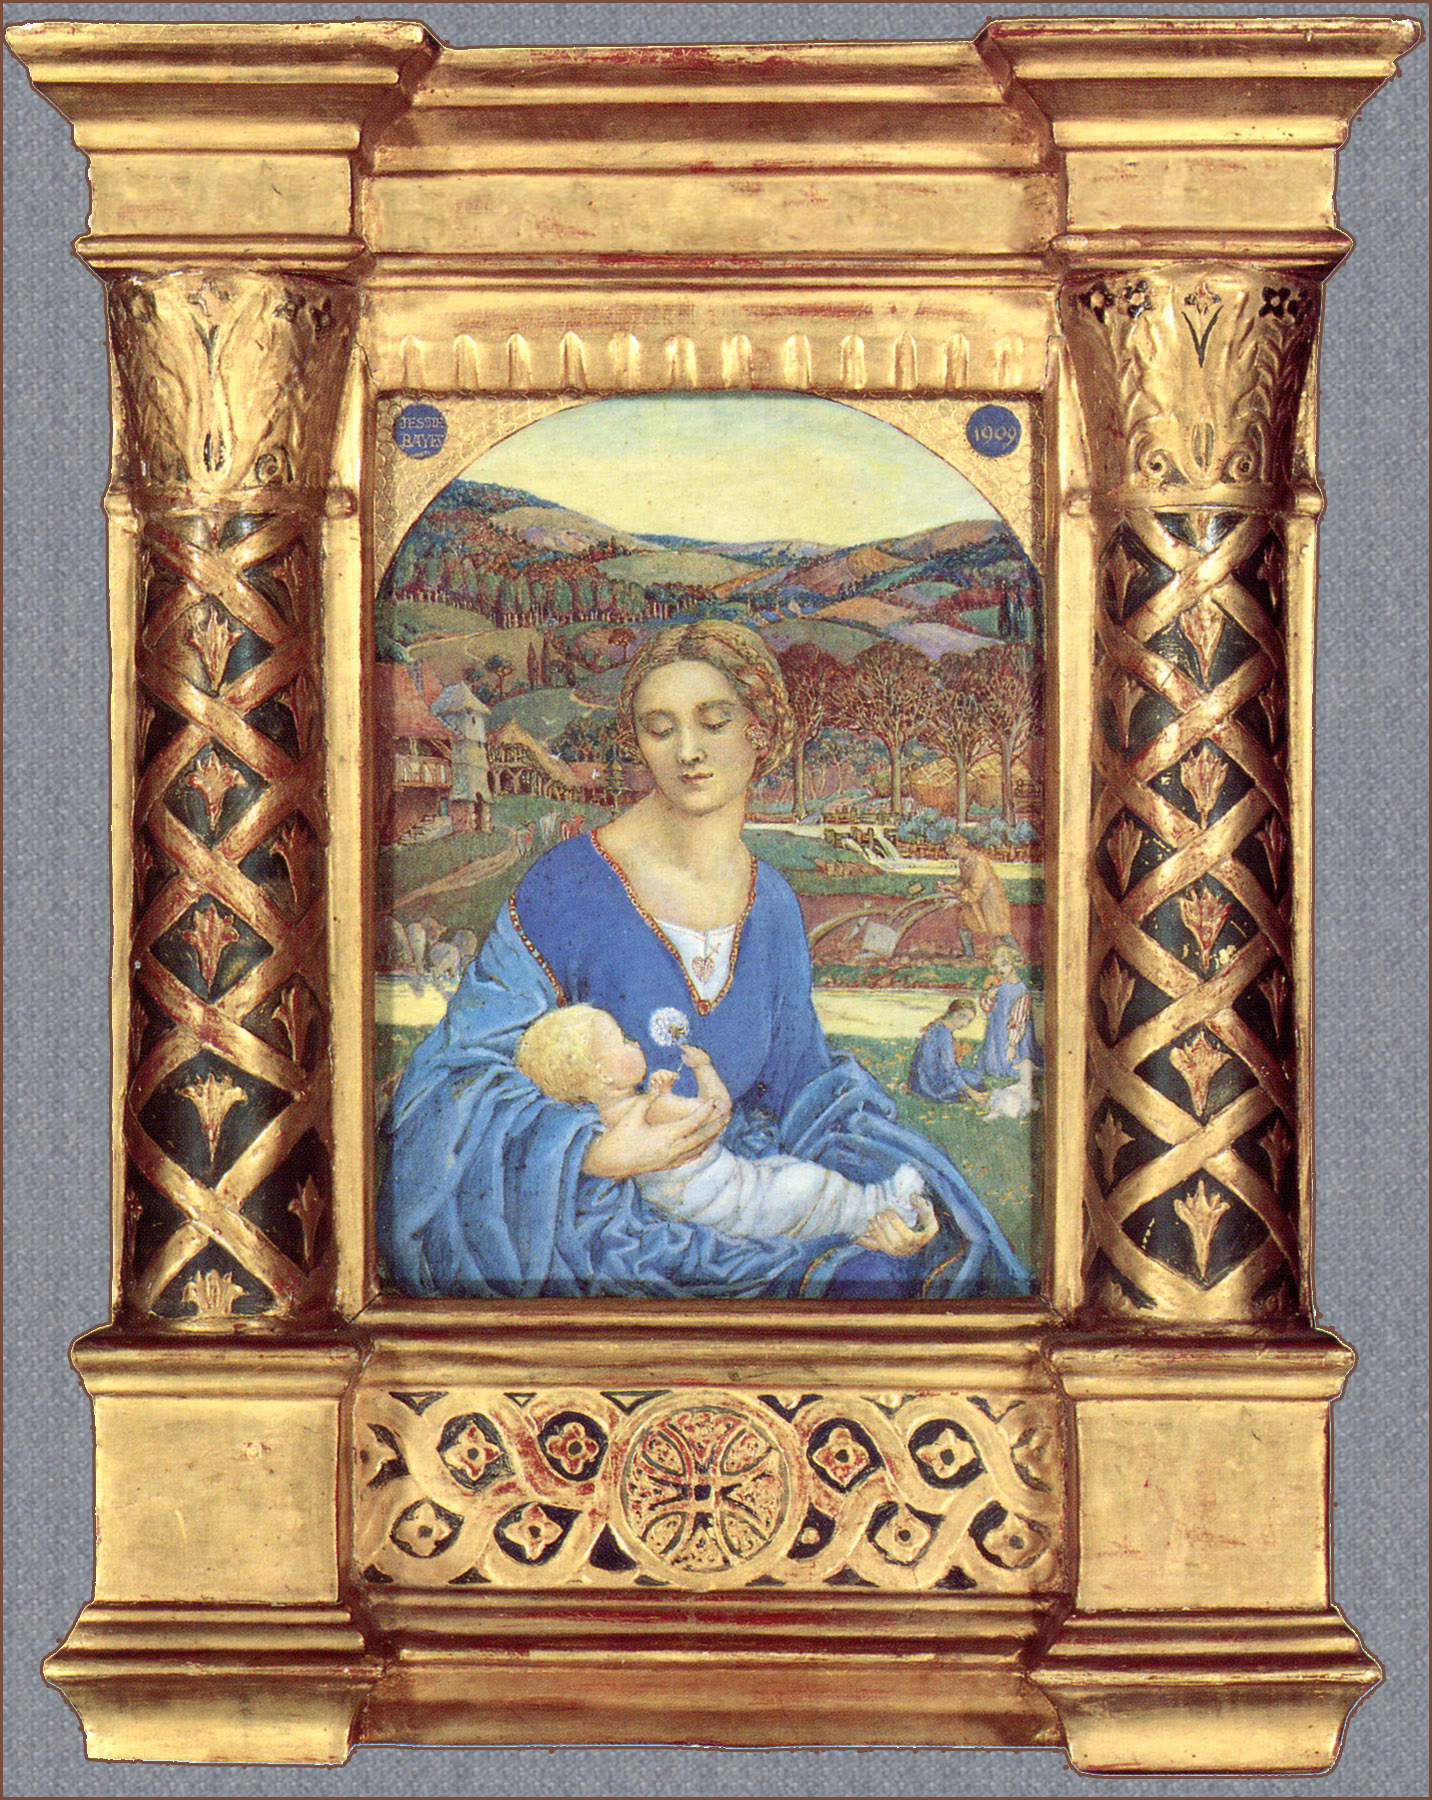 the painting in a frame features a lady holding a child